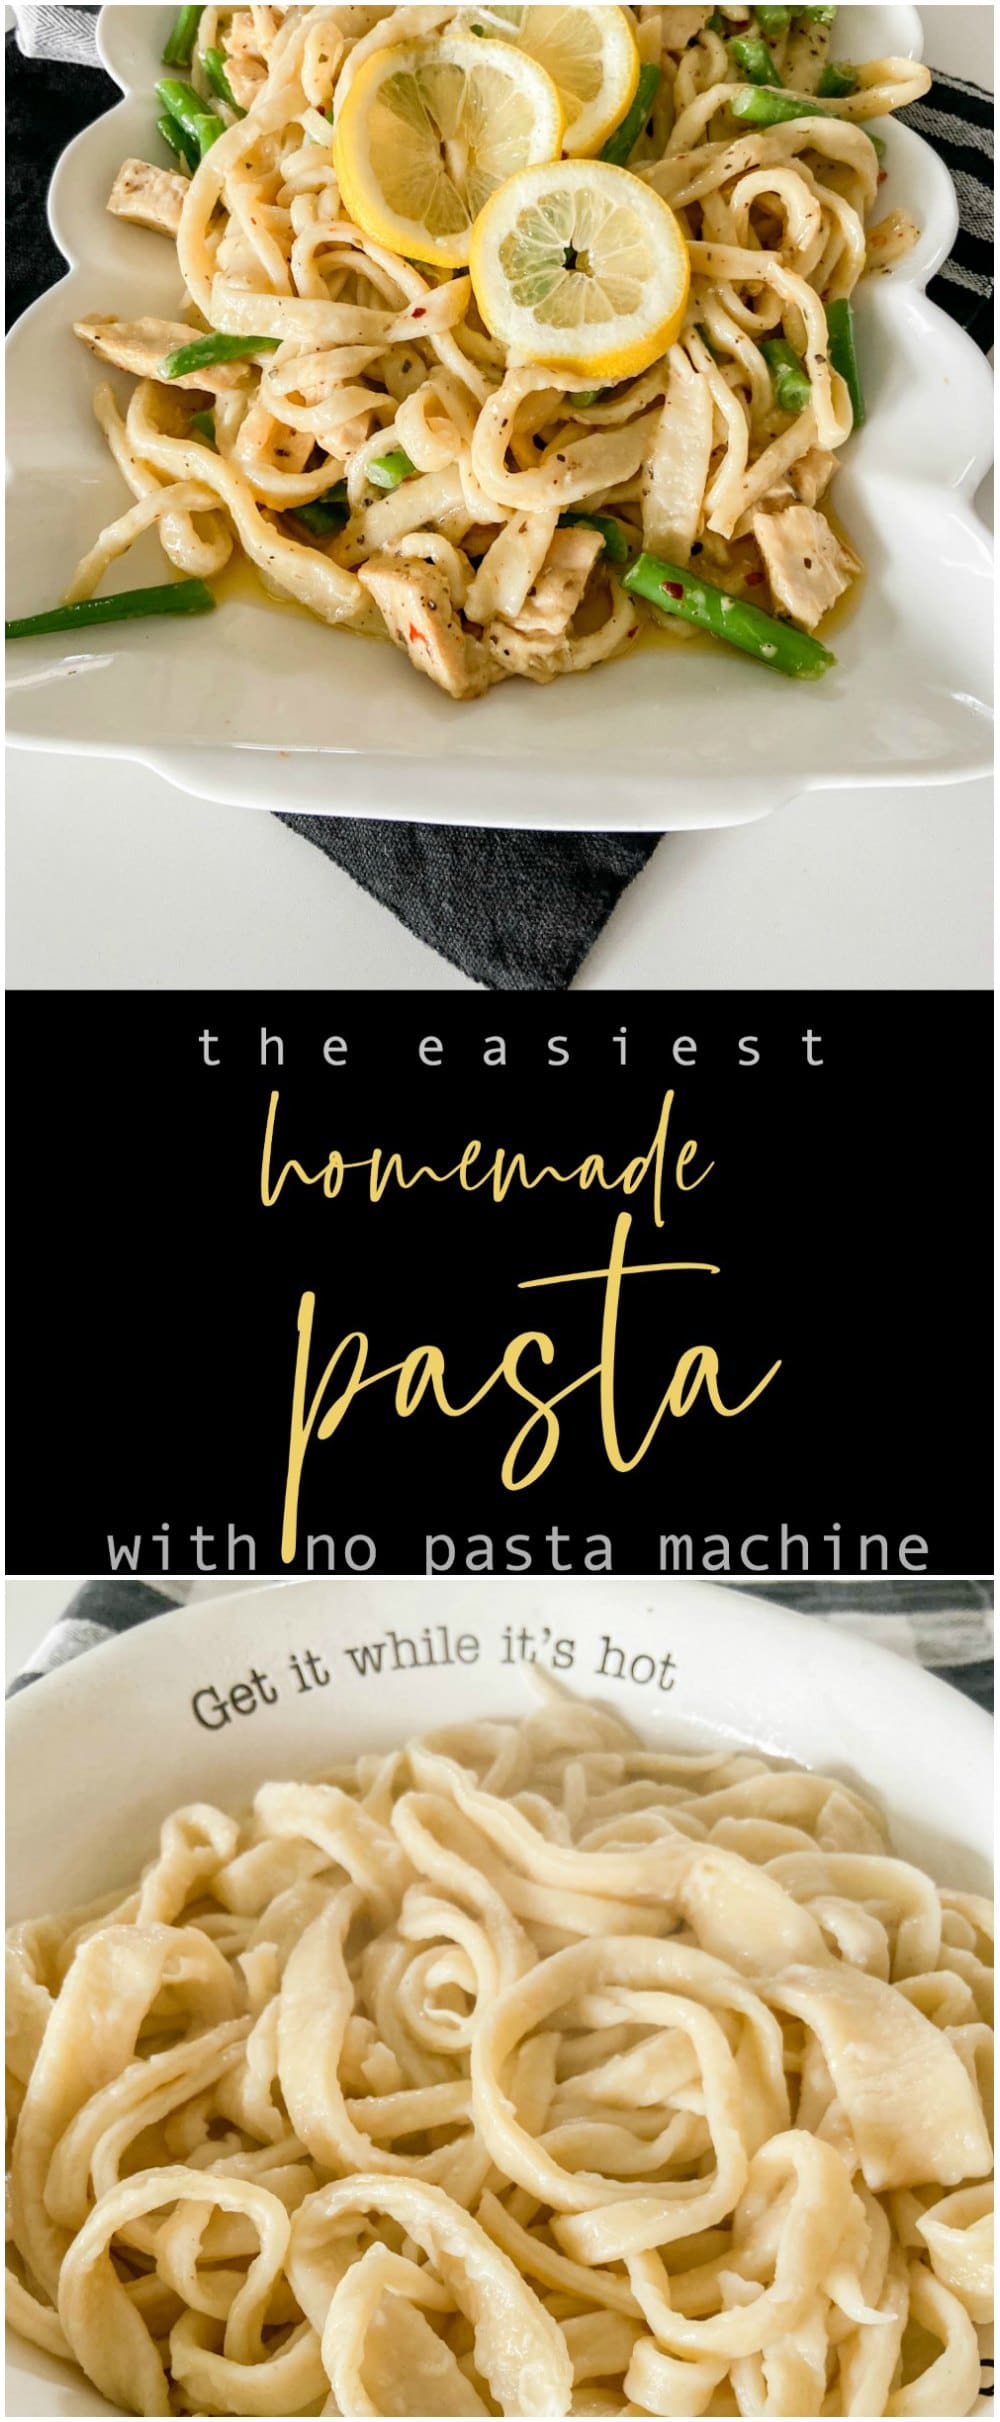 The easiest homemade pasta recipe with no machine! You only need a few simple ingredients to make your own pasta. Create spaghetti, fettuccine or even ravioli with this easy recipe and no machine is needed!